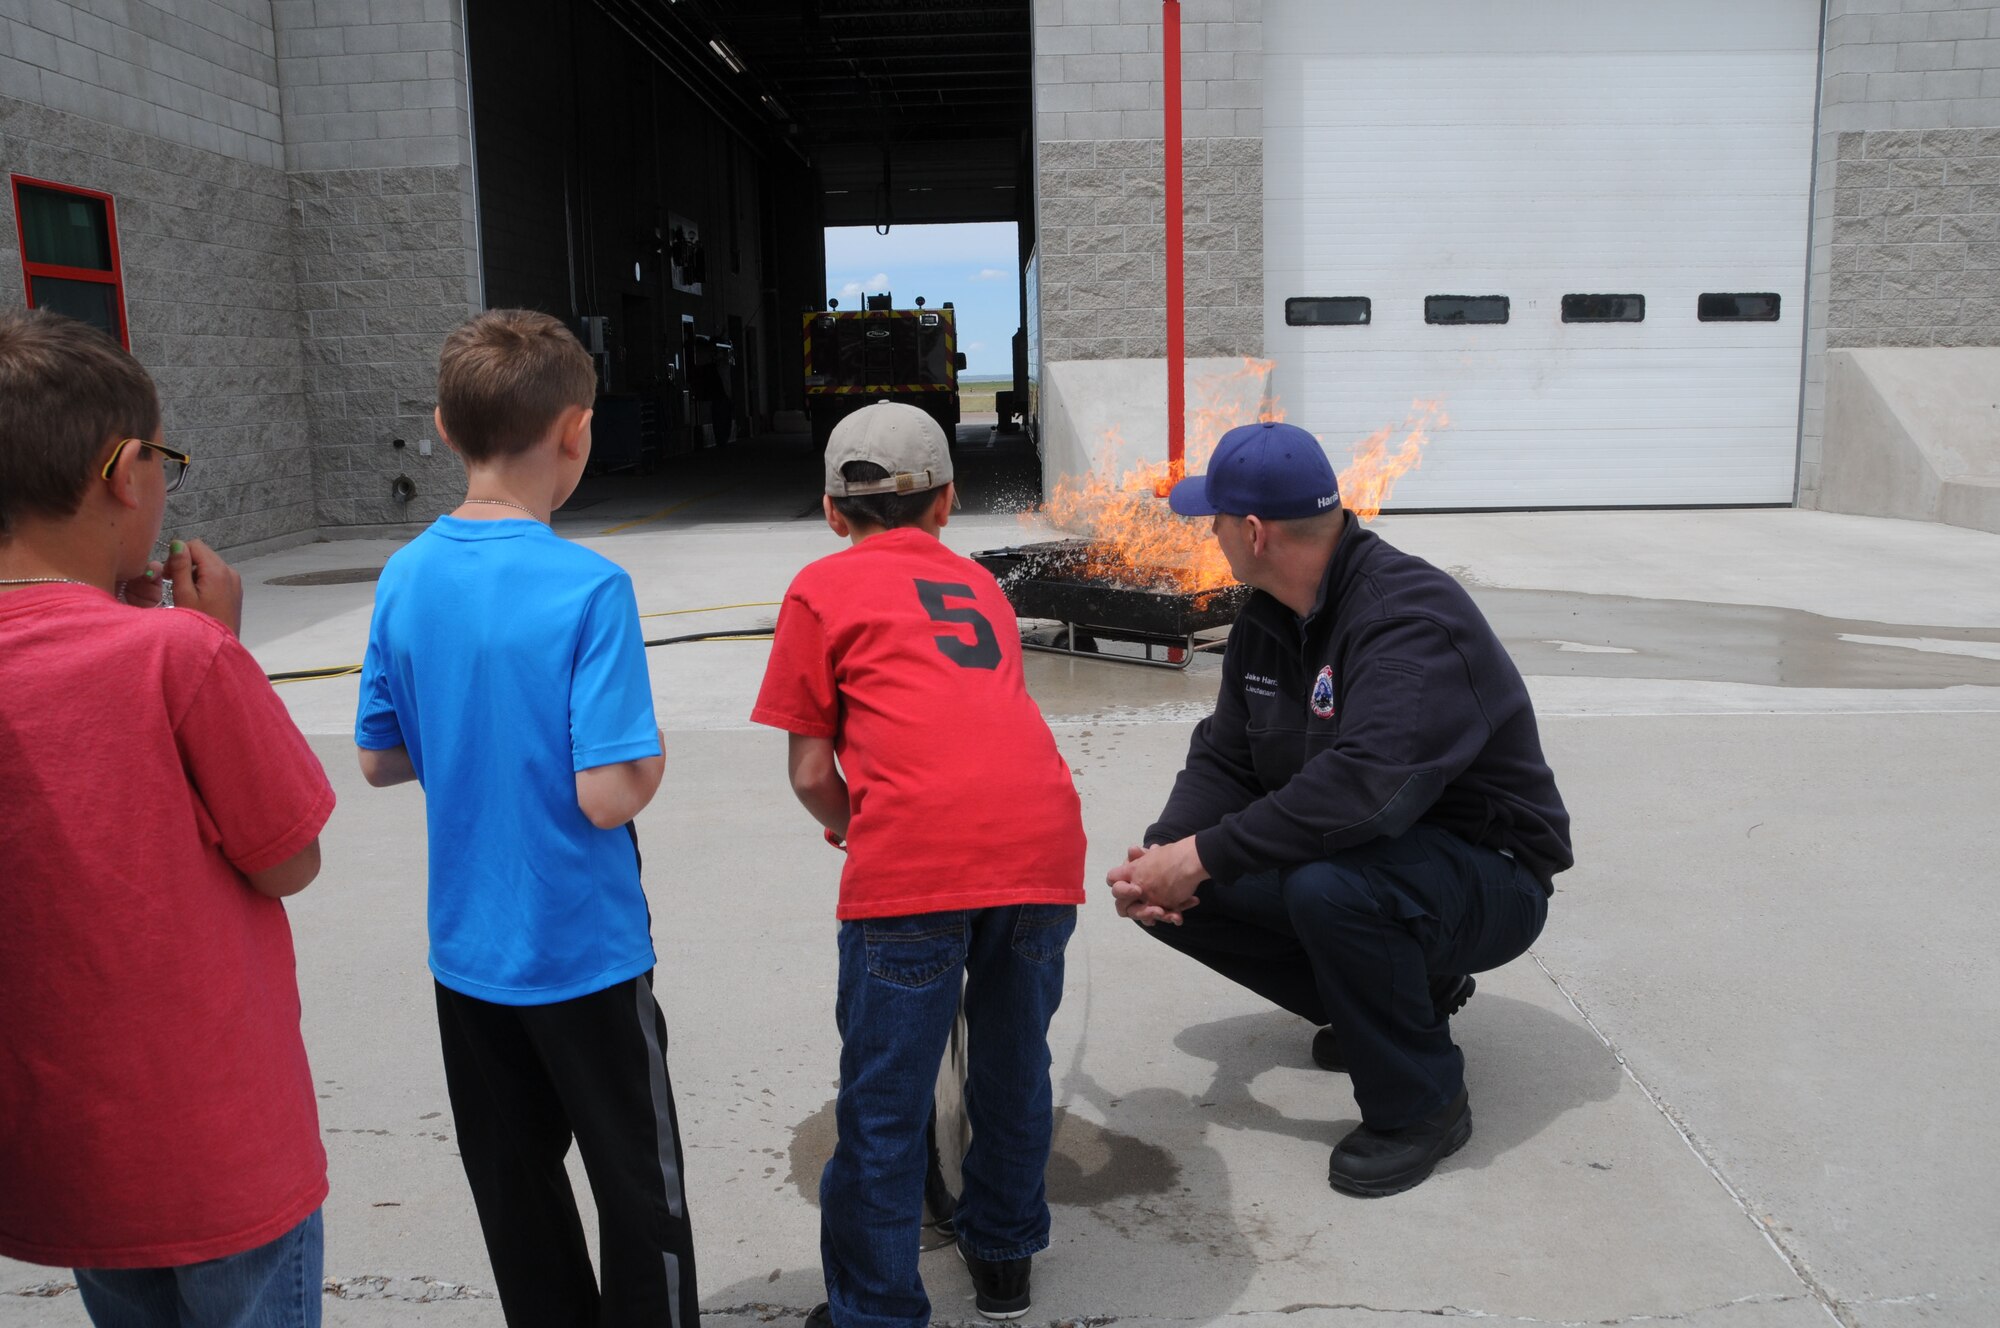 Montana Air National Guard Fire Department Lt. Jacob Harris observes as a child uses a fire extinguisher on a fire during a STARBASE tour of the station June 15, 2016. (U.S. Air National Guard photo/Senior Master Sgt. Eric Peterson)